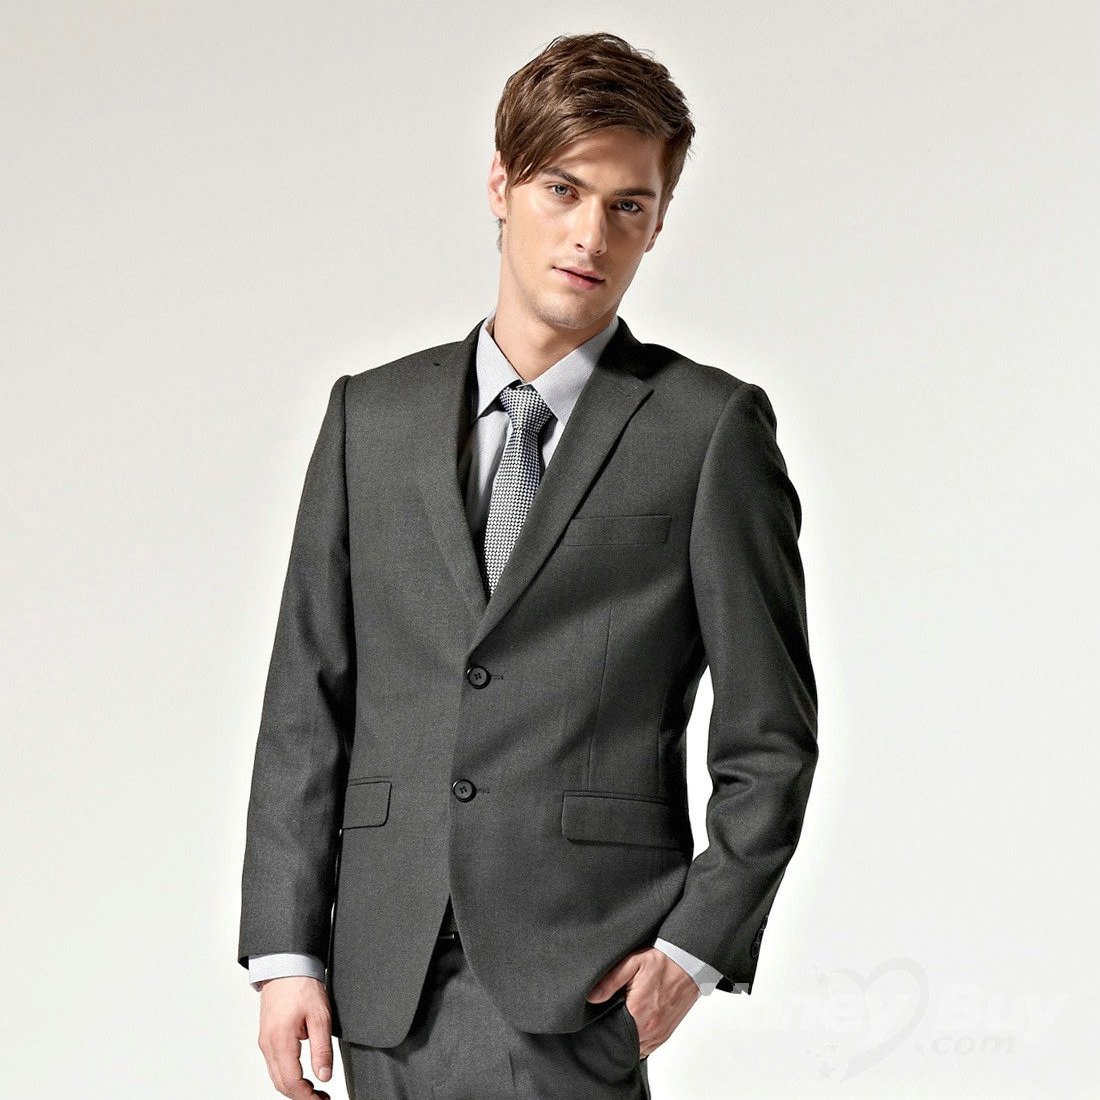 Online Custom Made Suits